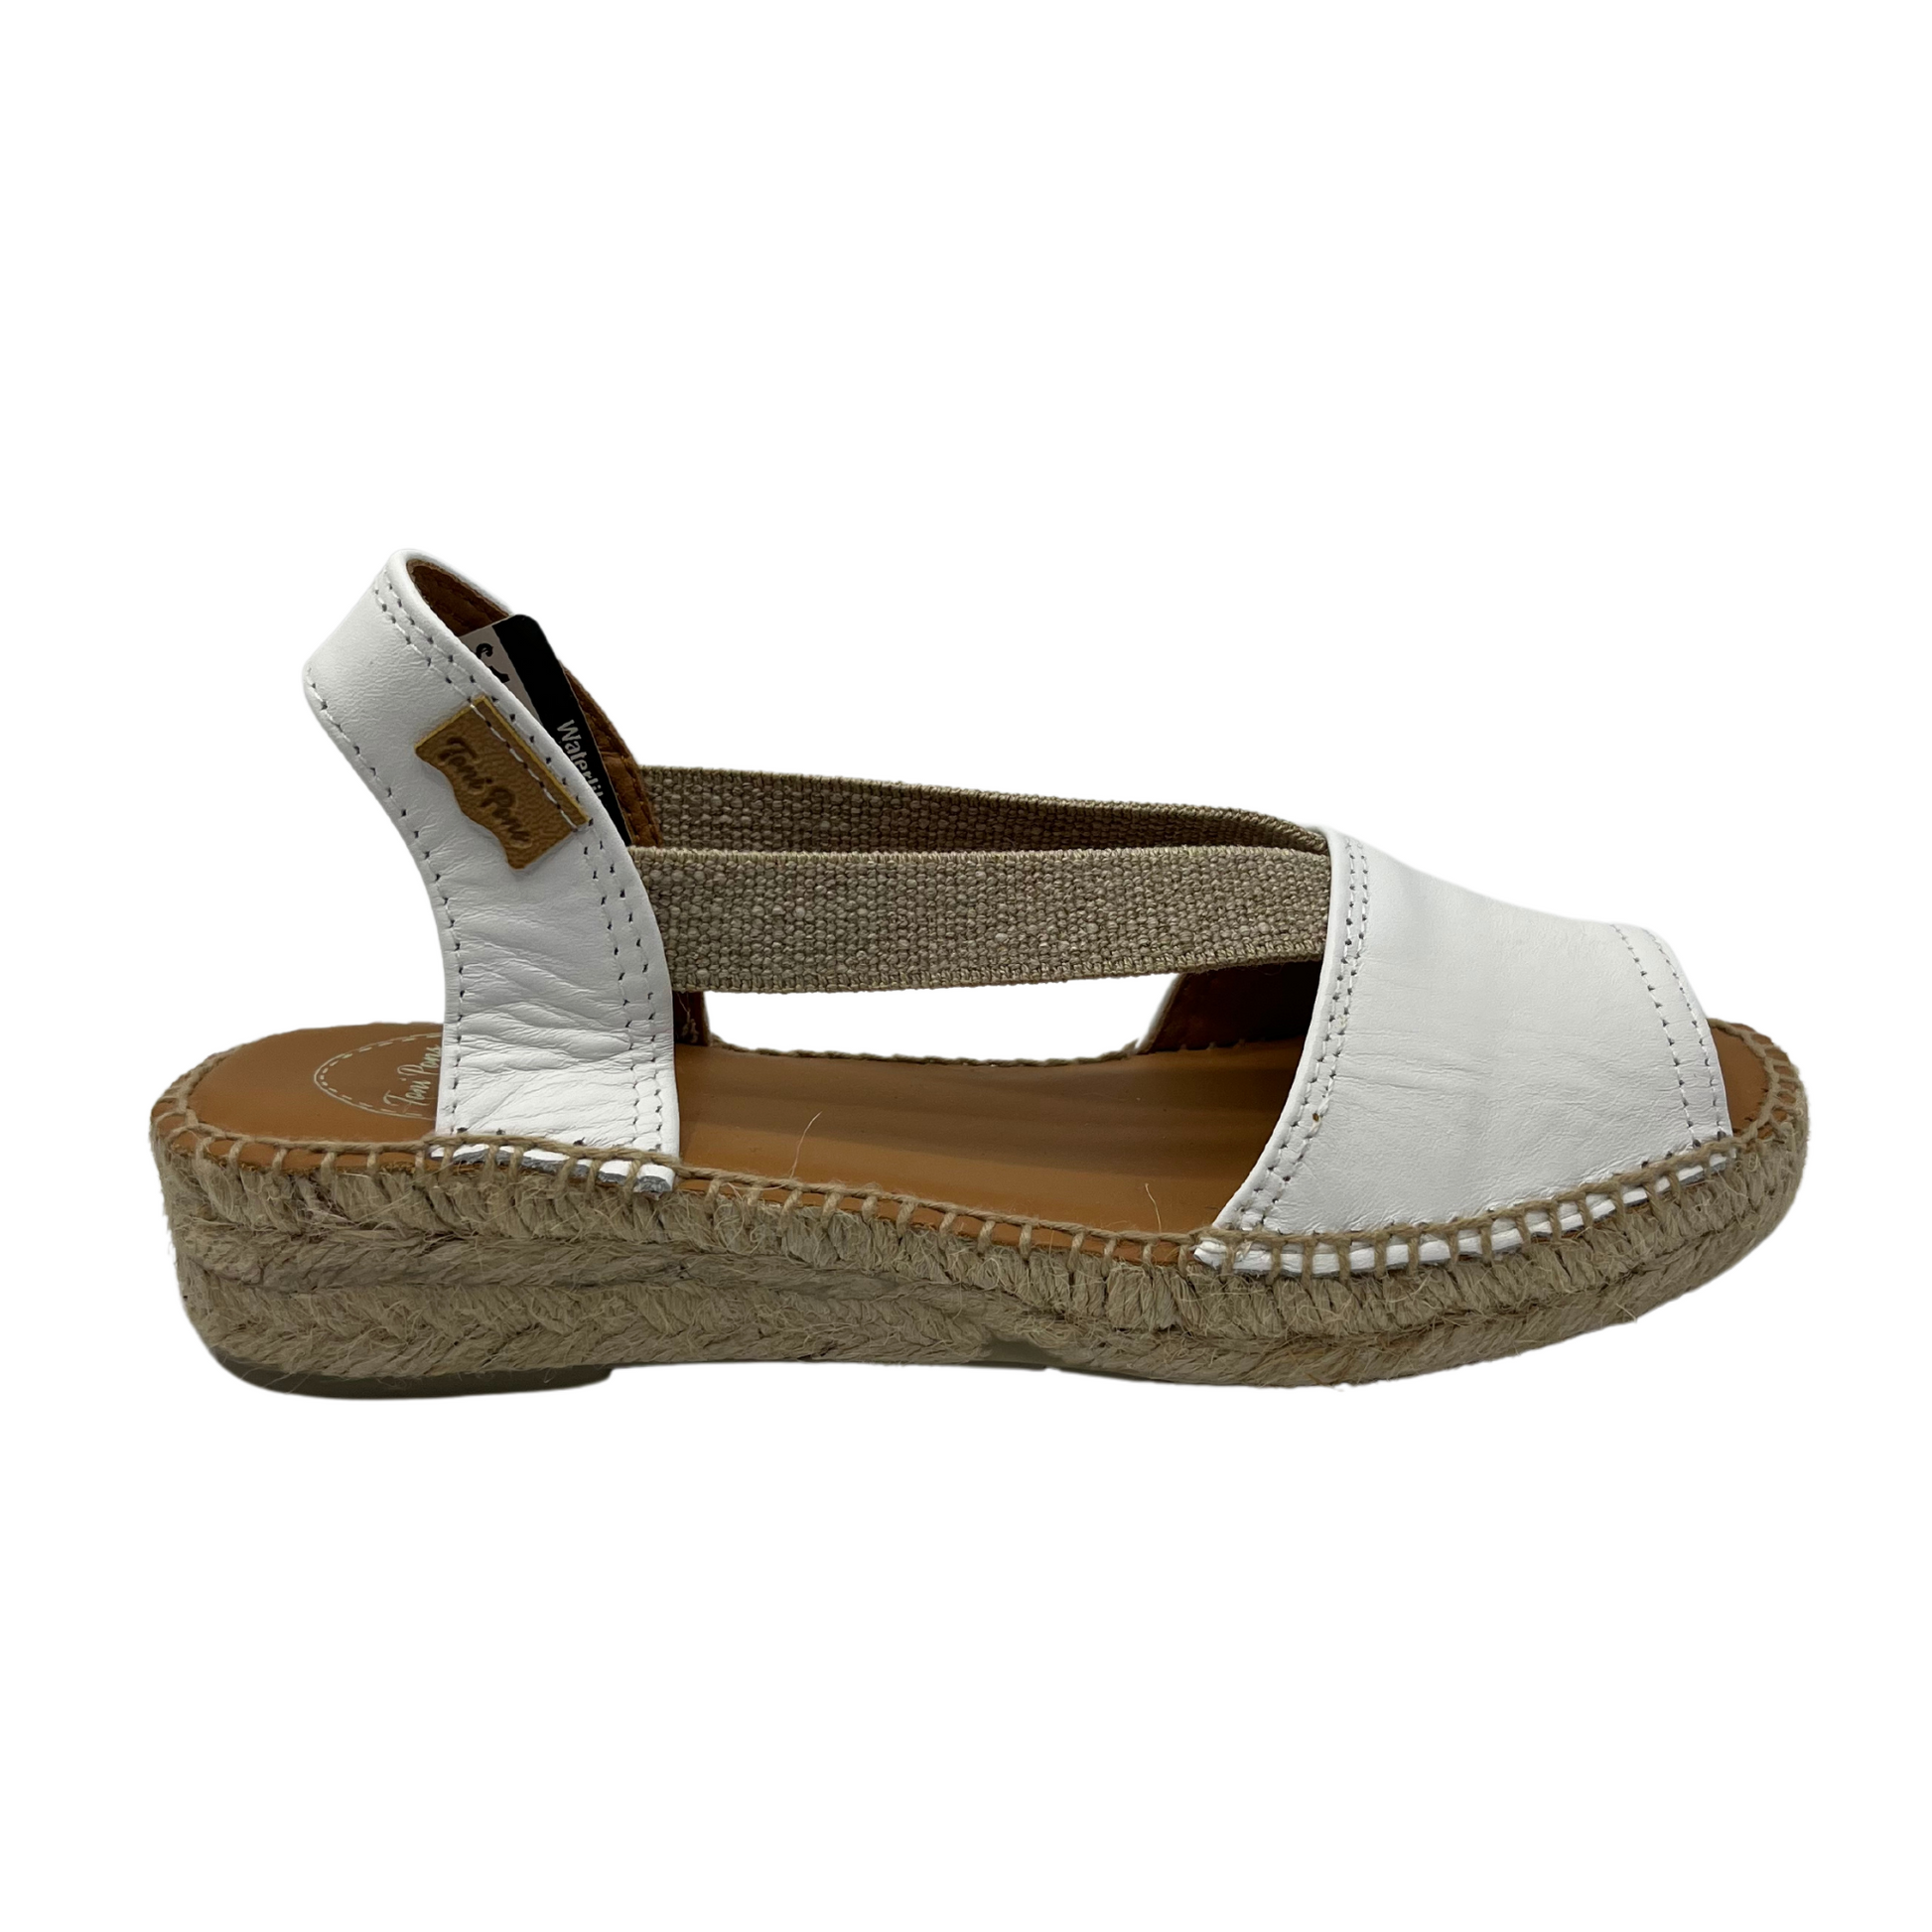 Right facing view of white leather sandal with brown lining and rounded toe